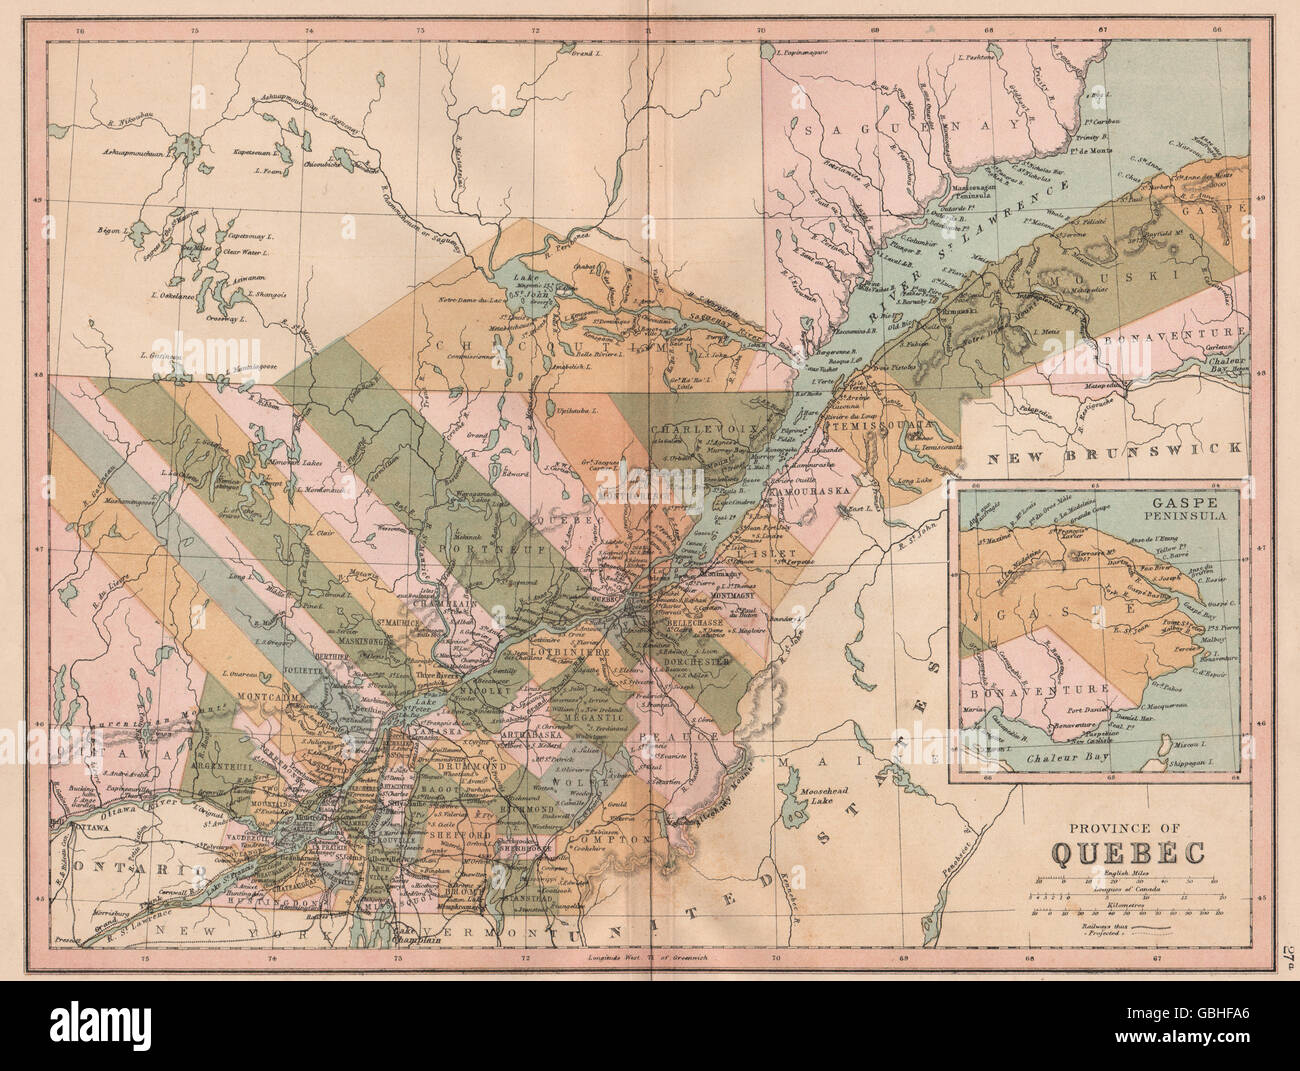 QUEBEC: Showing counties. COLLINS, 1880 antique map Stock Photo